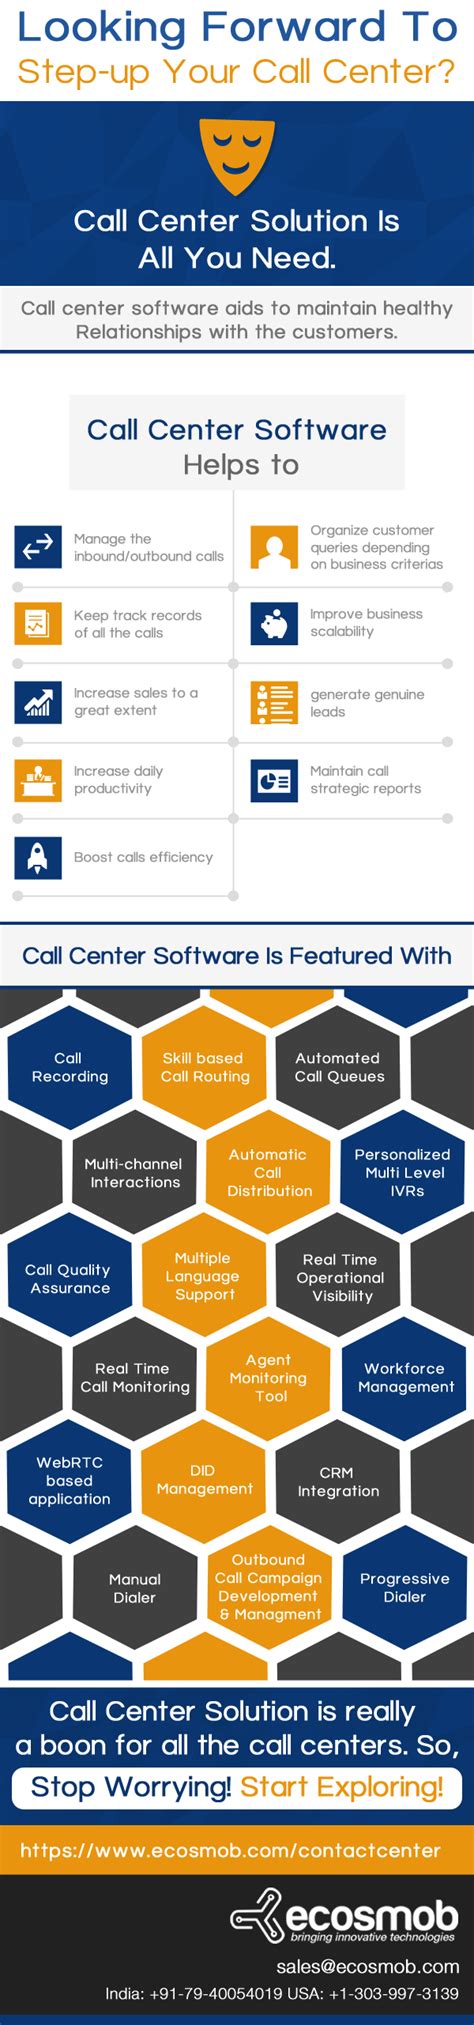 Manage Your Call Center More Efficiently And Increase Customer